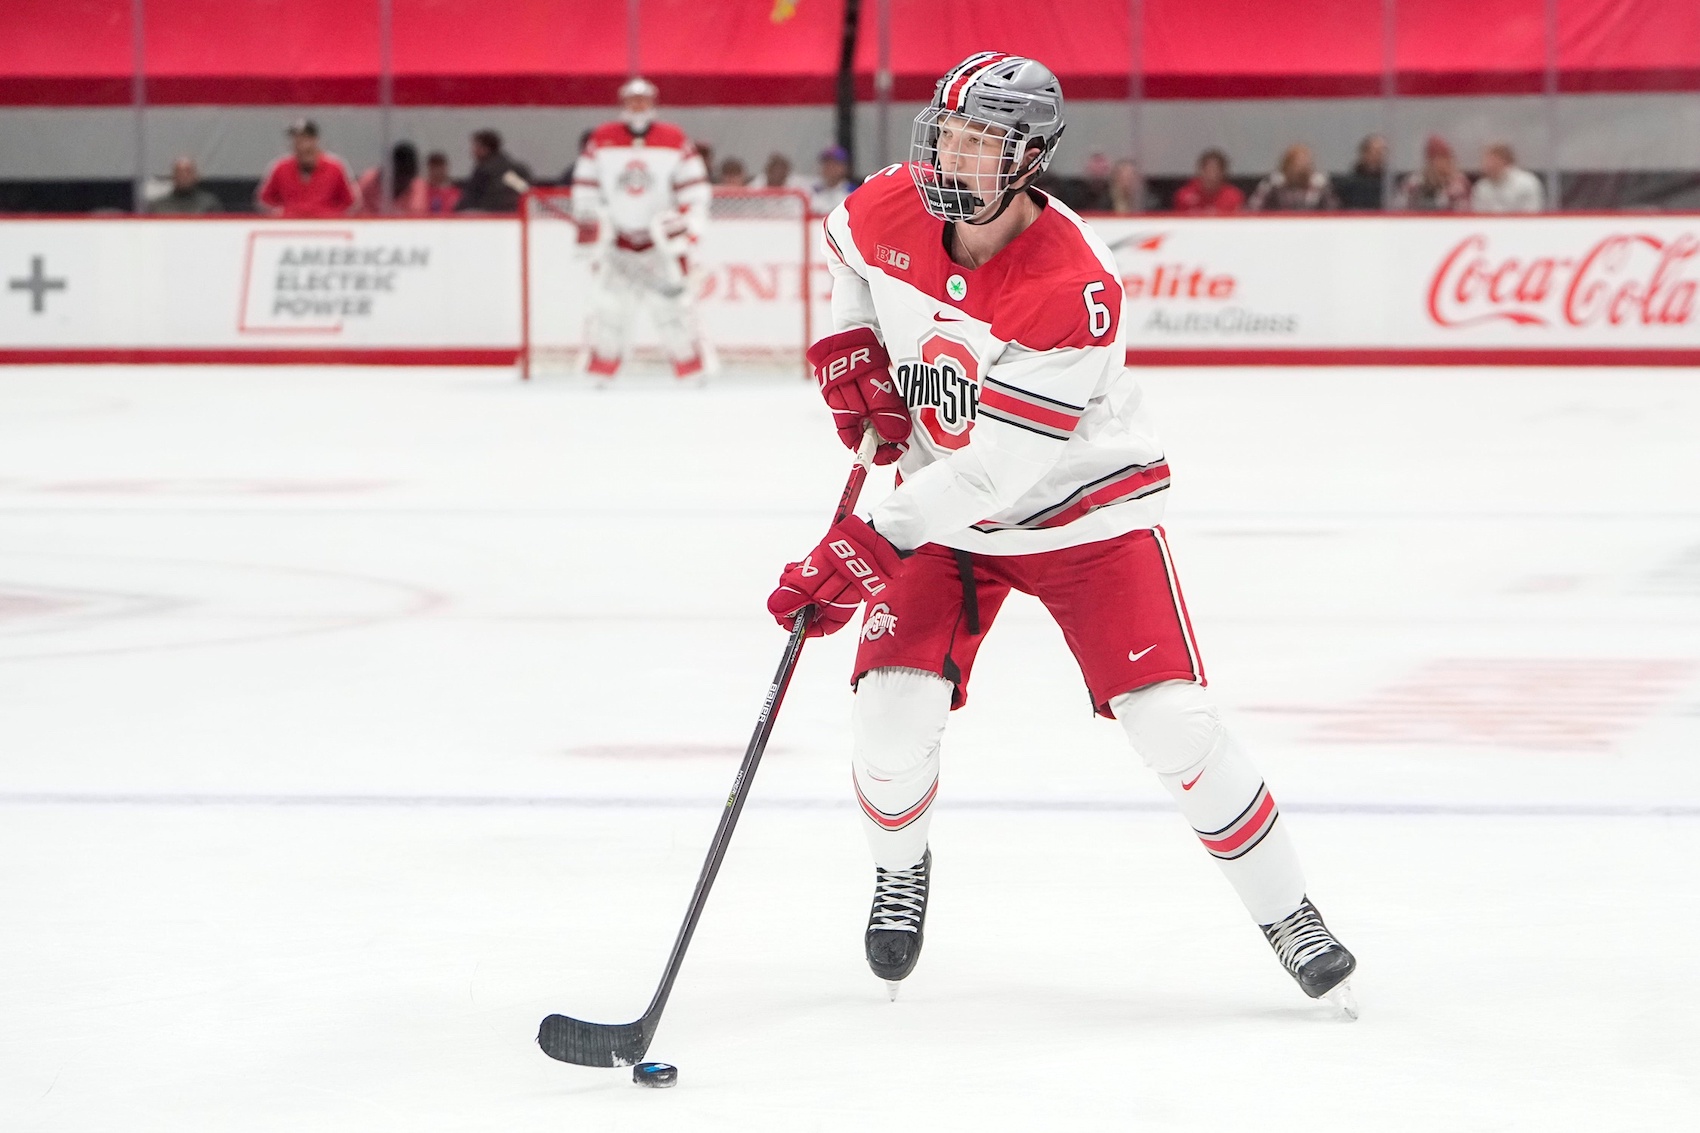 Oct 7, 2022; Columbus, Ohio, USA; Ohio State Buckeyes defenseman Mason Lohrei (6) brings the puck up ice during the NCAA men's hockey game against the Wisconsin Badgers at the Schottenstein Center. Mandatory Credit: Adam Cairns-The Columbus Dispatch